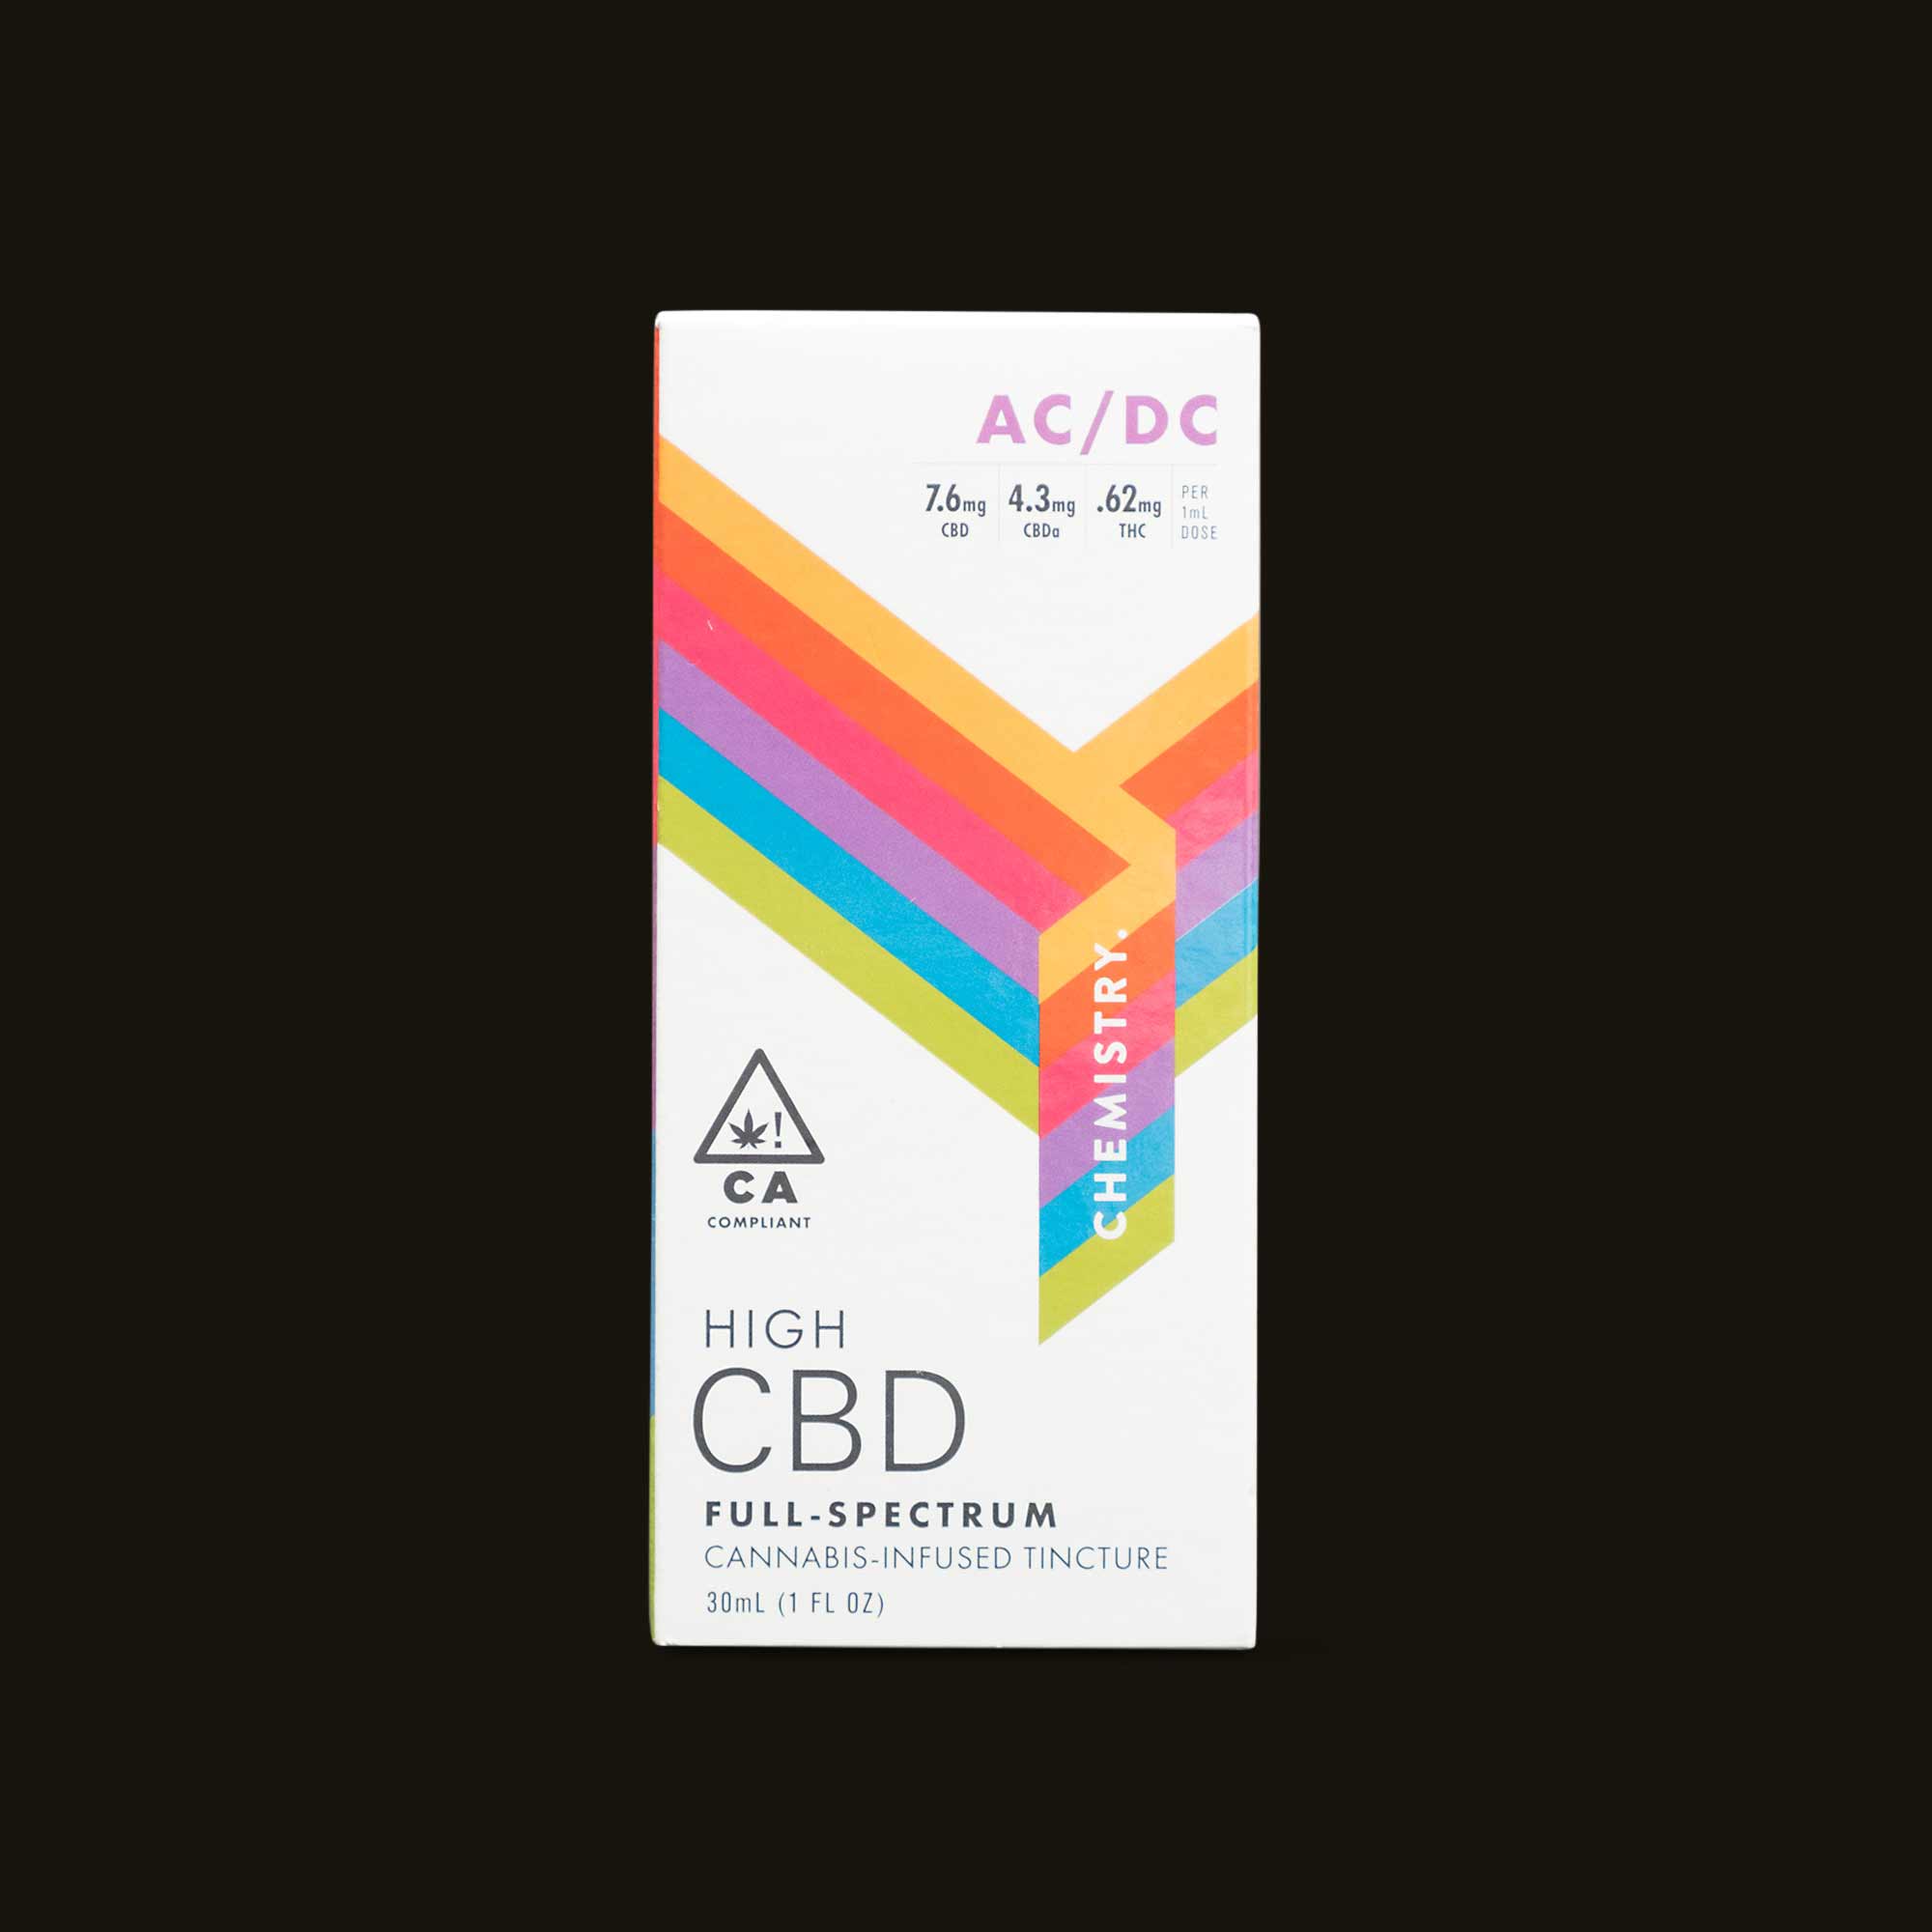 CA-SF-JULY-2019-CHEMISTRY-ACDC-1-510908